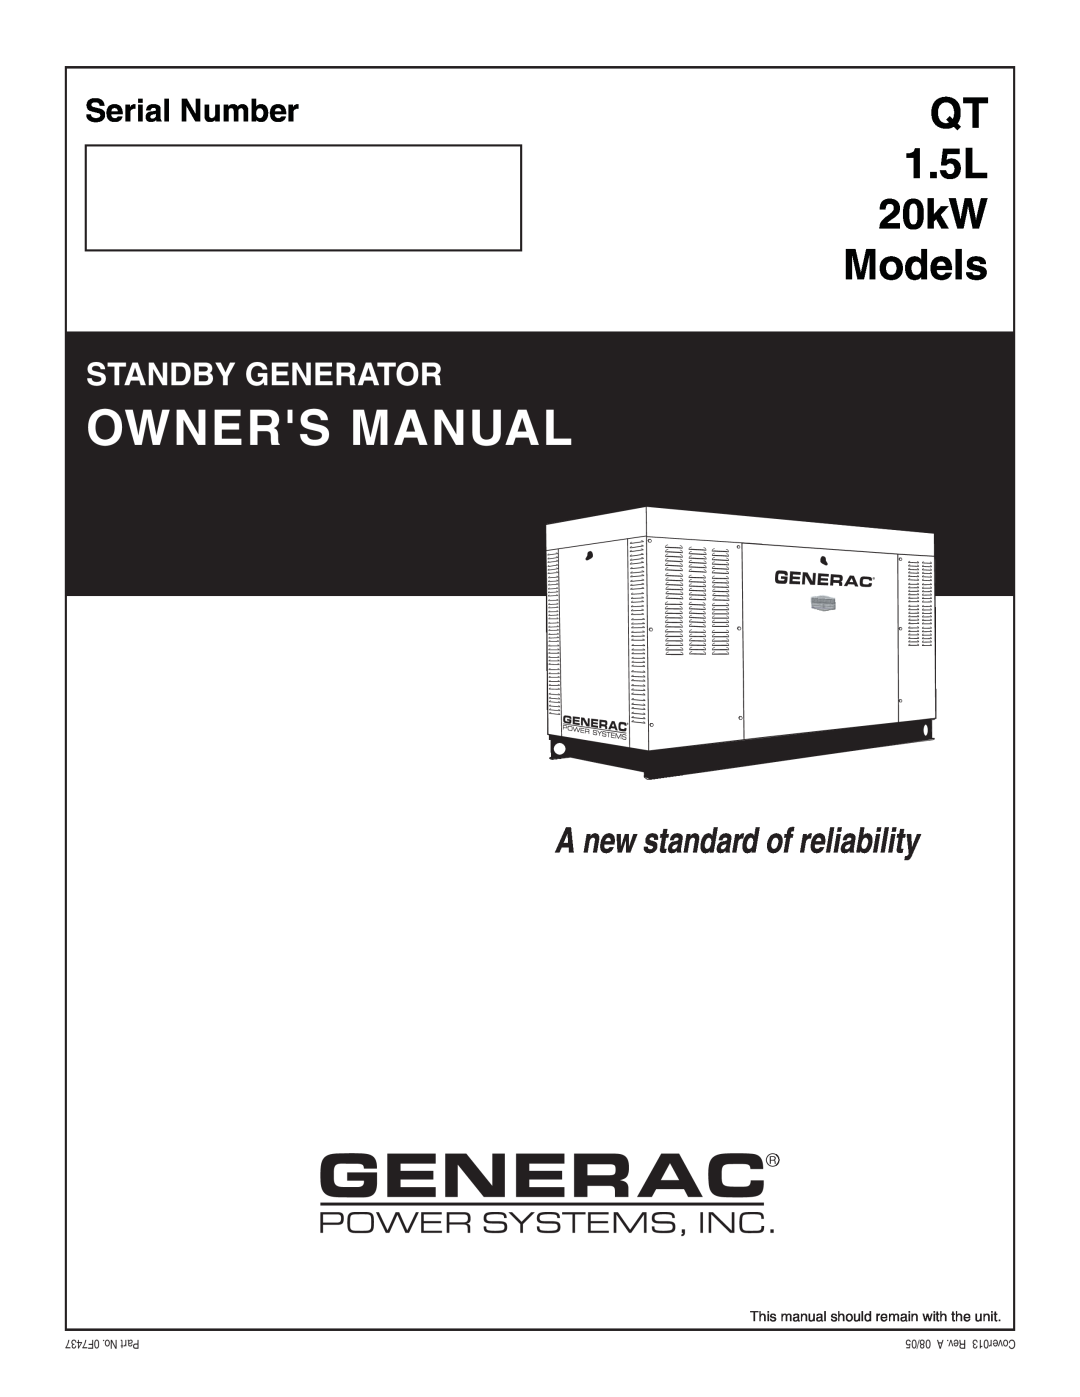 Generac owner manual Owners Manual, QT 1.5L 20kW Models, A new standard of reliability, Serial Number, 0F7437 .No Part 